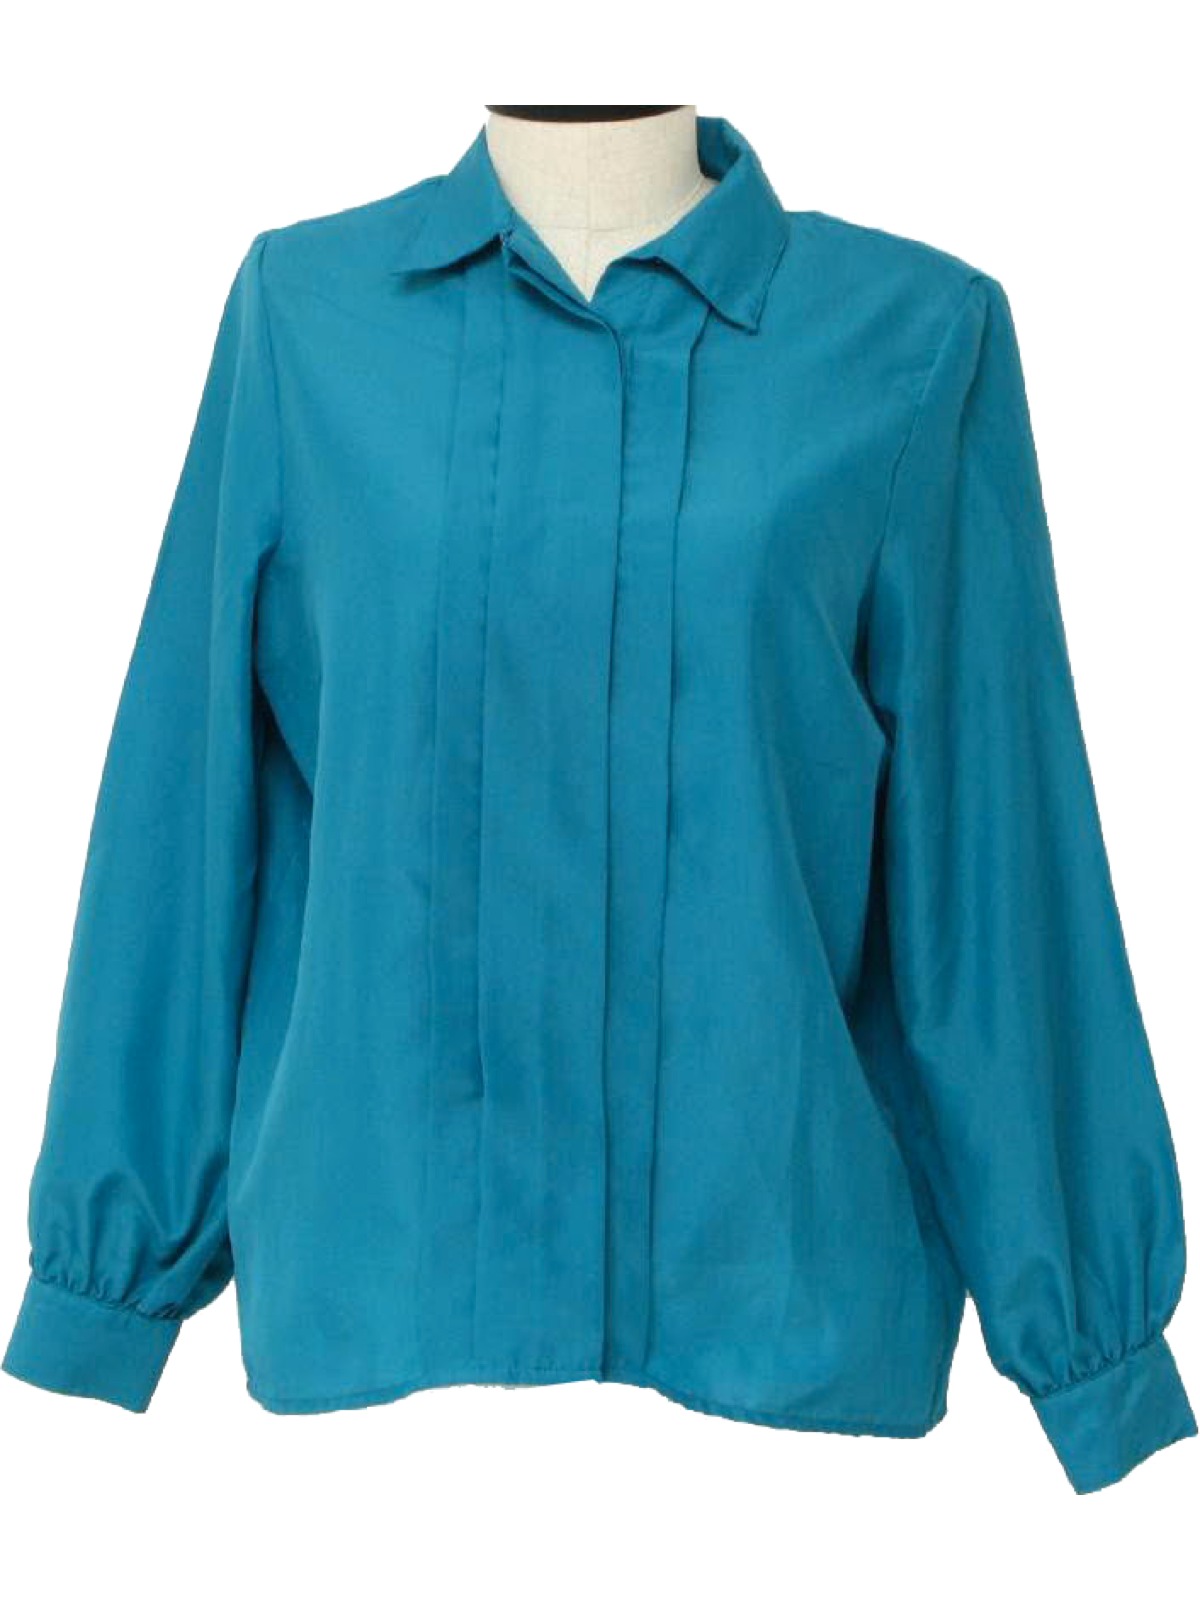 Retro 1980's Shirt (Separate Issue) : 80s -Separate Issue- Womens teal ...